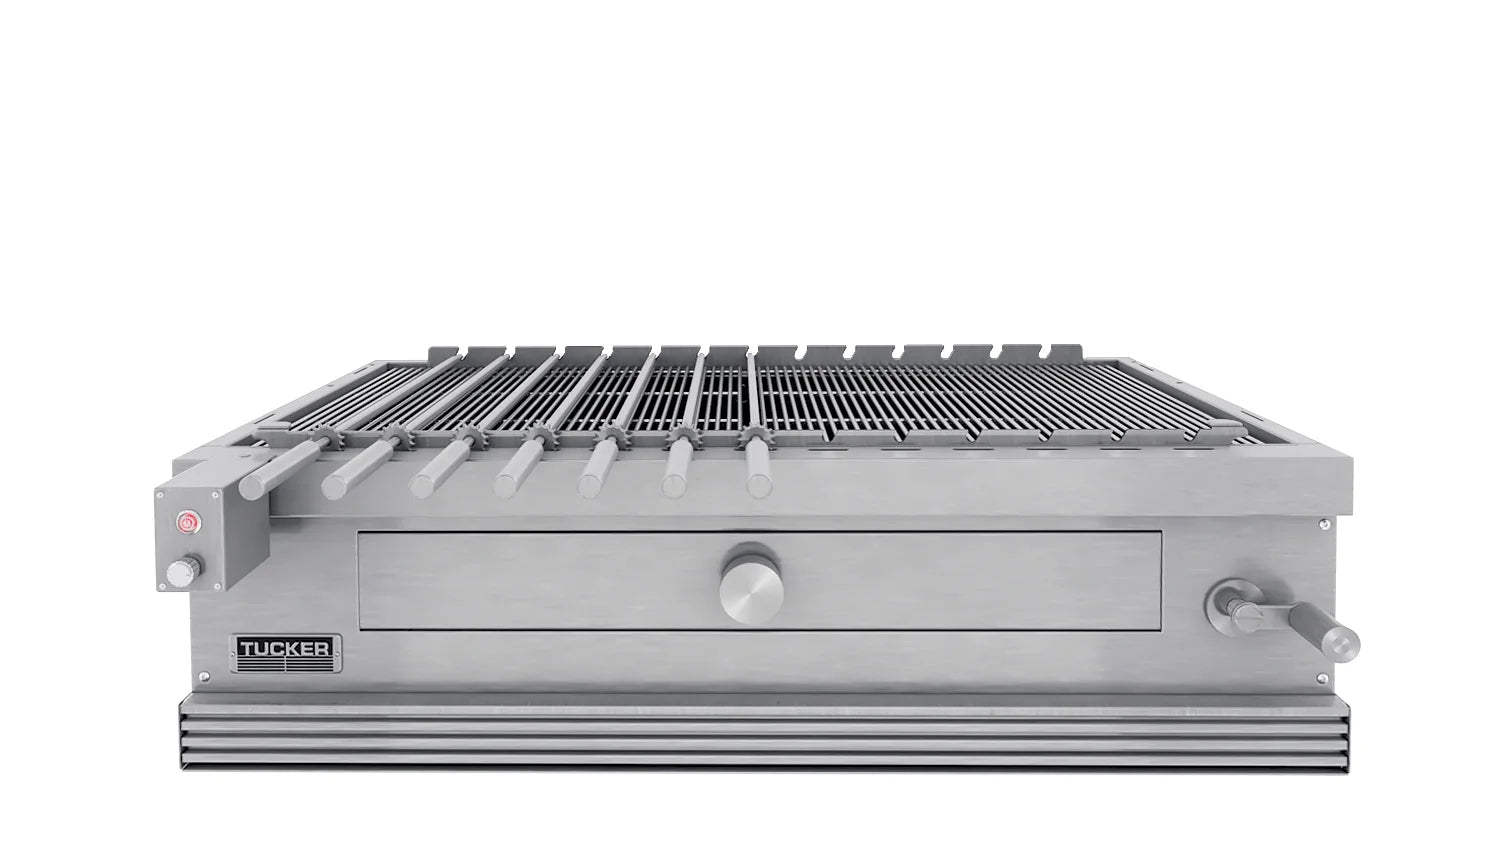 Tucker Charcoal Deluxe Pro XL Built-In BBQ With Hinged Flat Lid